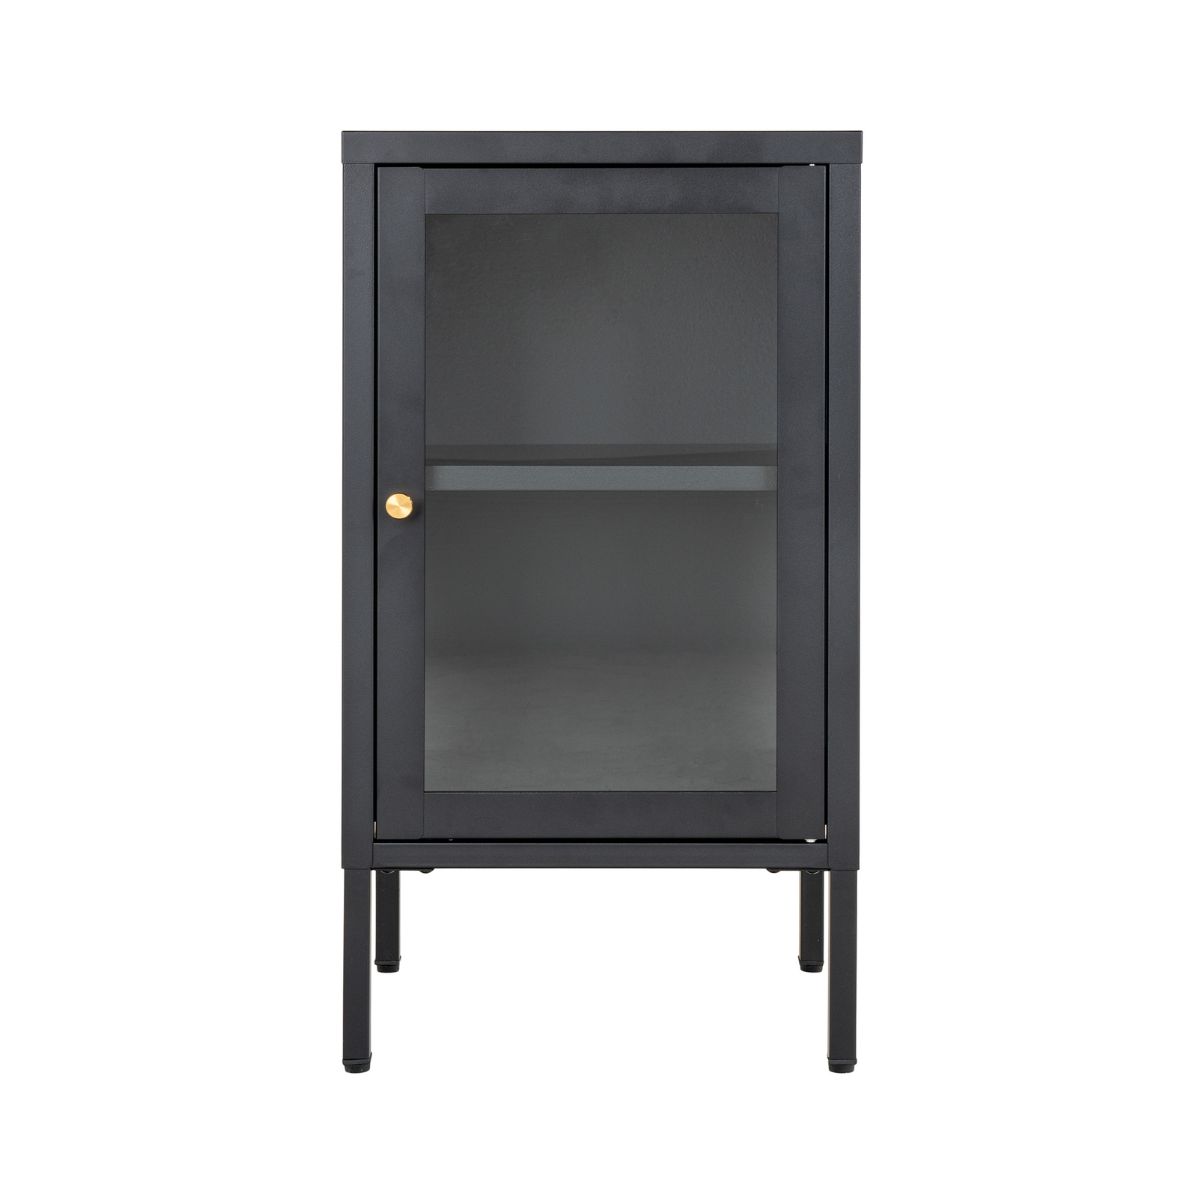 Mobilier interior - Dulapior negru din otel si sticla 70 cm inaltime Dalby House Nordic, hectarul.ro